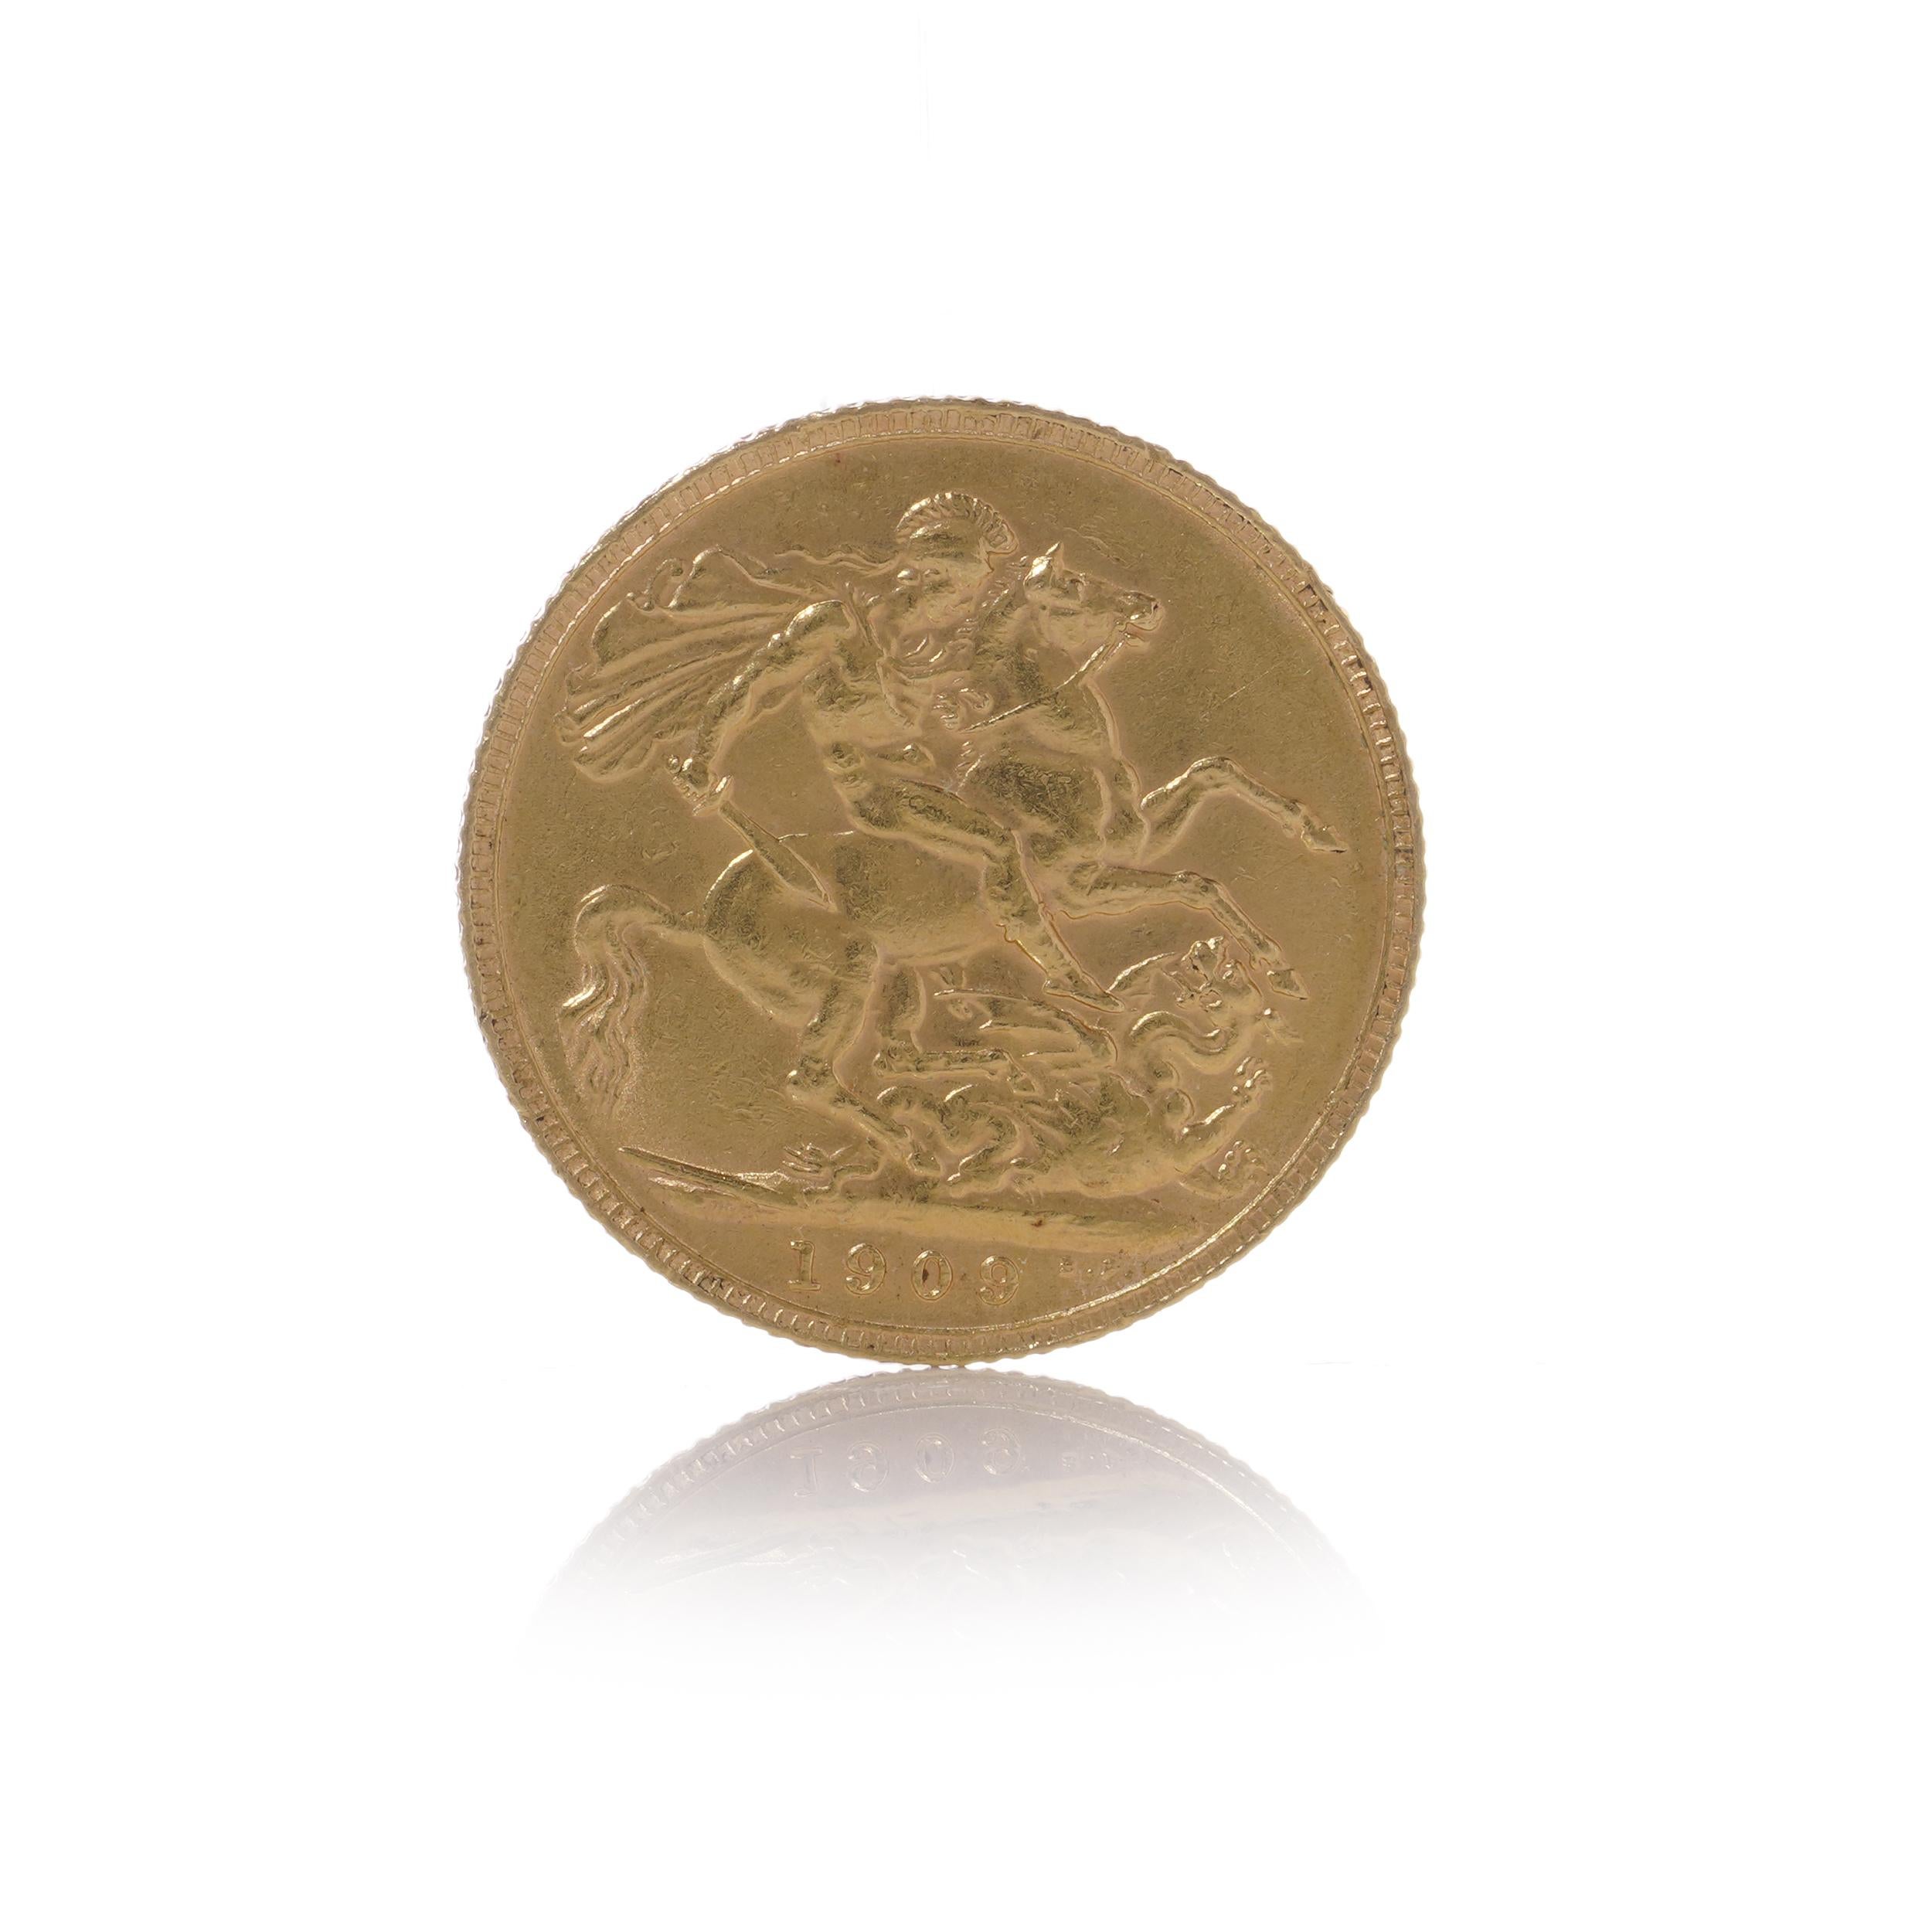 1909 gold Sovereign featuring King Edward VII and the George & Dragon design. Coin provided in a plastic capsule. The M mintmark denotes the Melbourne Mint in Australia.

Manufacturer: Royal Mint

Weight (grams): 7.98

Pure gold content (grams):